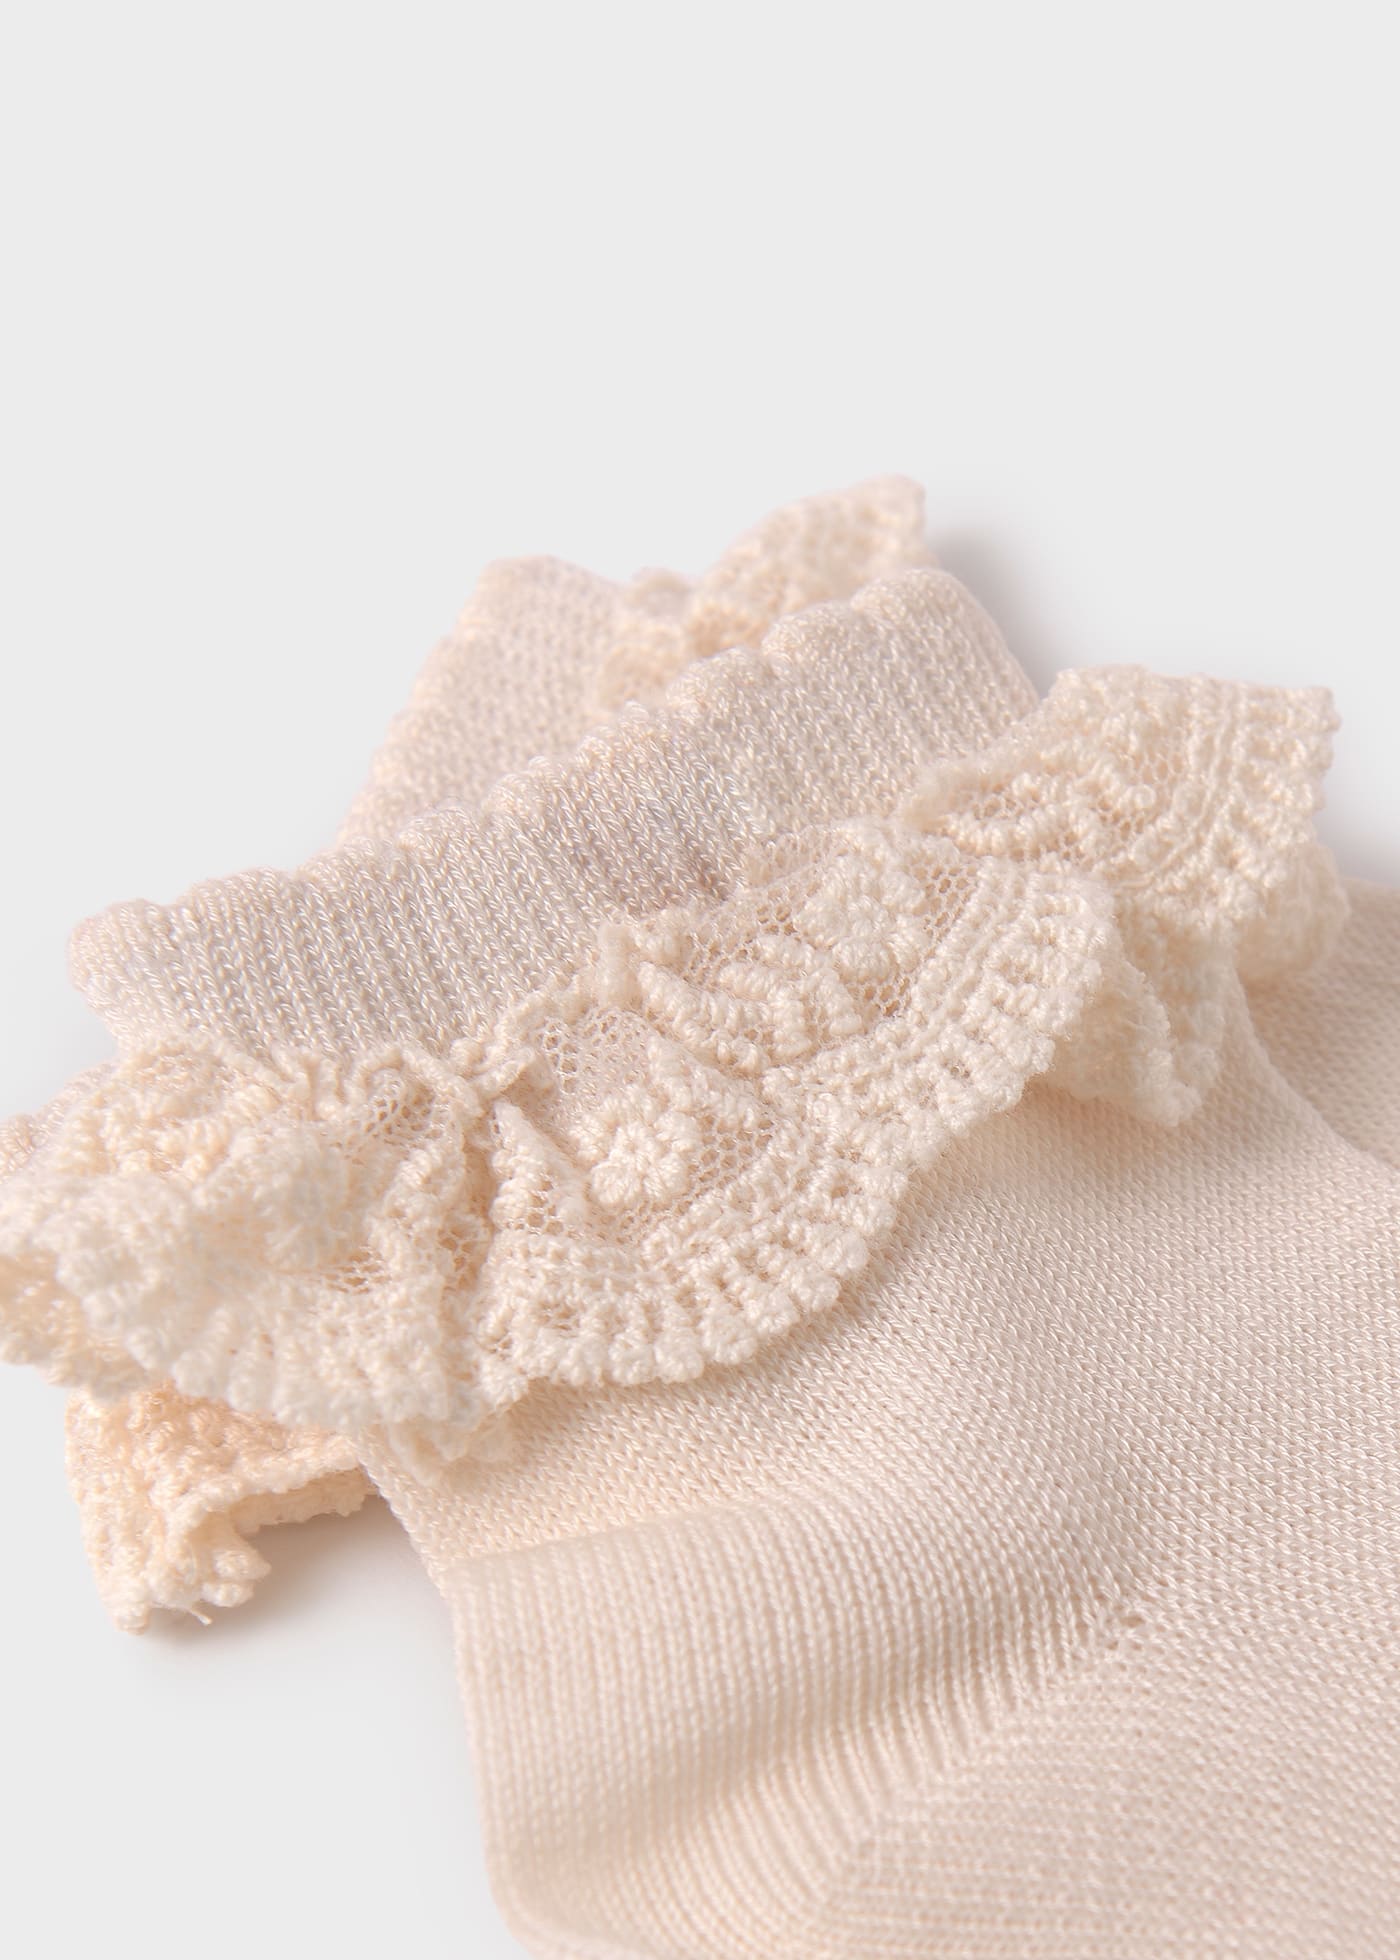 Baby embroidered tulle socks